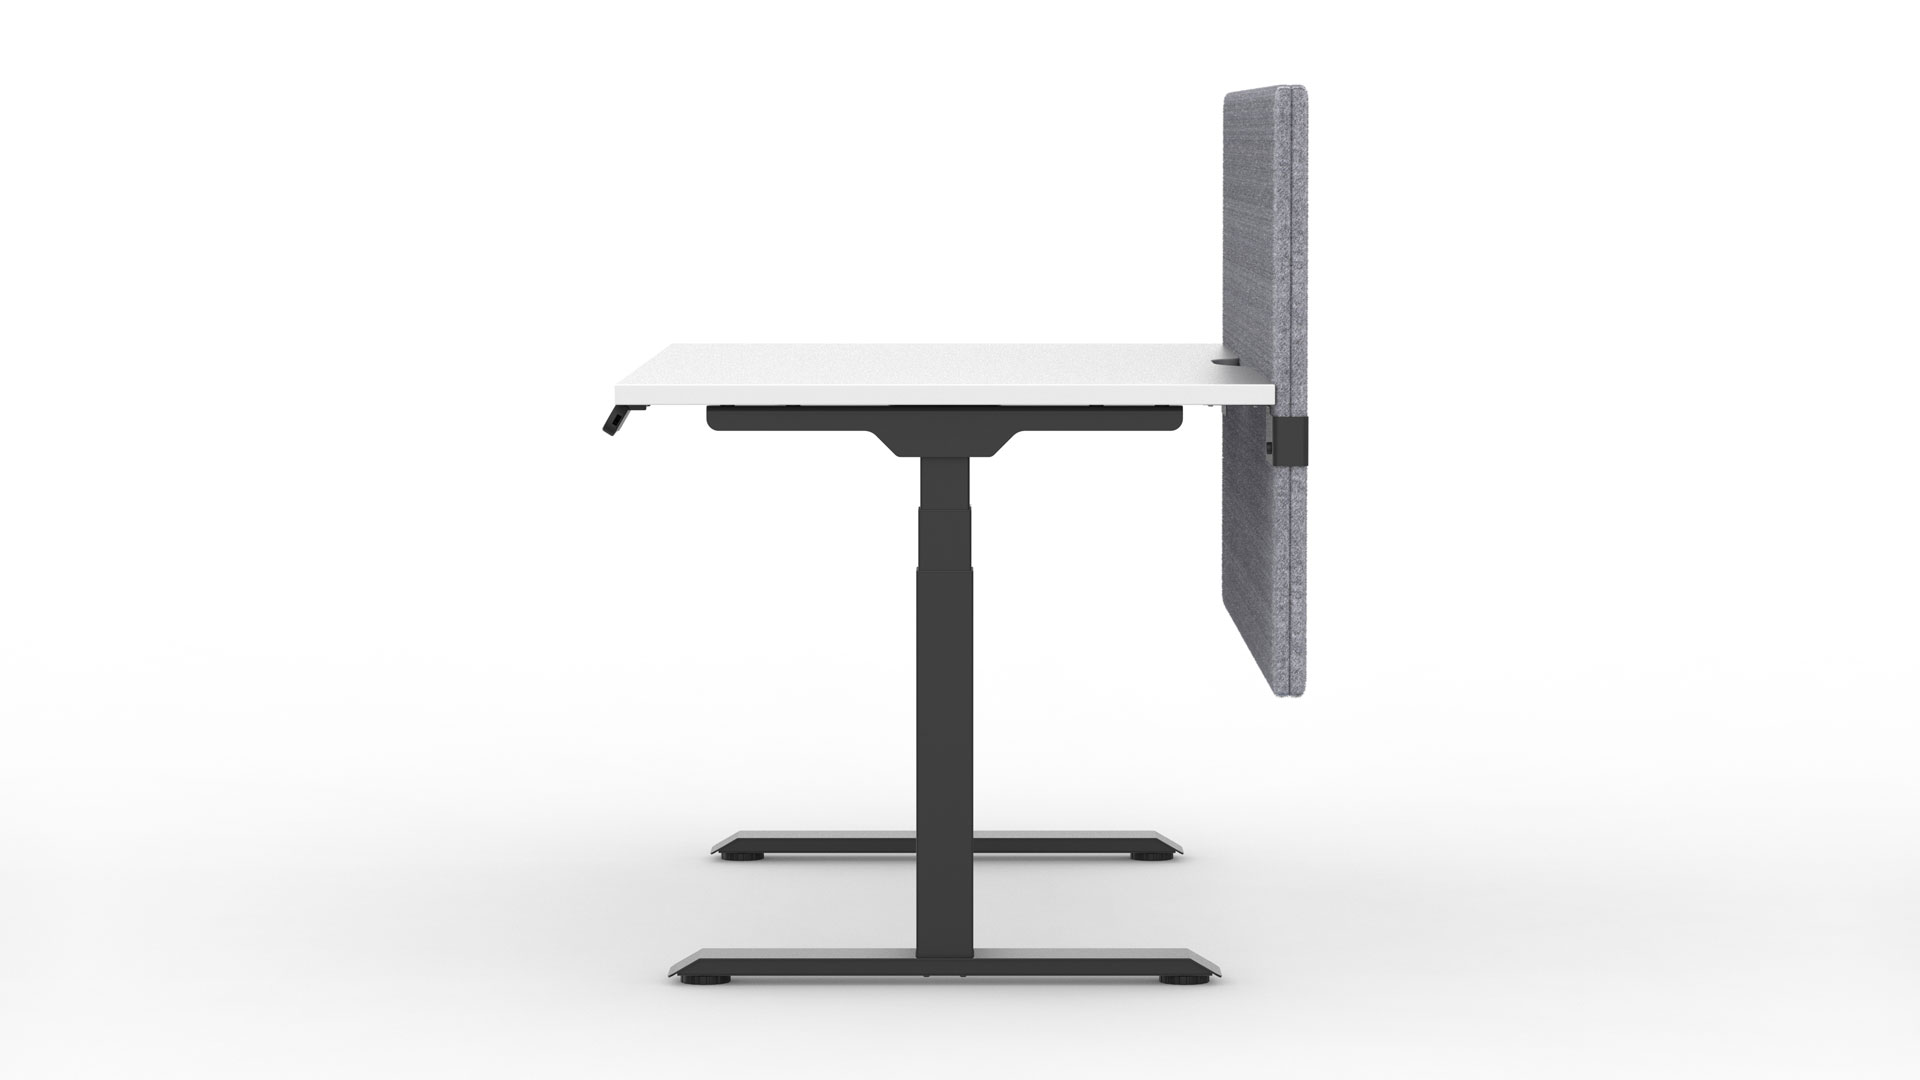 Acoustic desktop screens are double-sided and attach to the desktop, maintaining privacy when the desk is raised